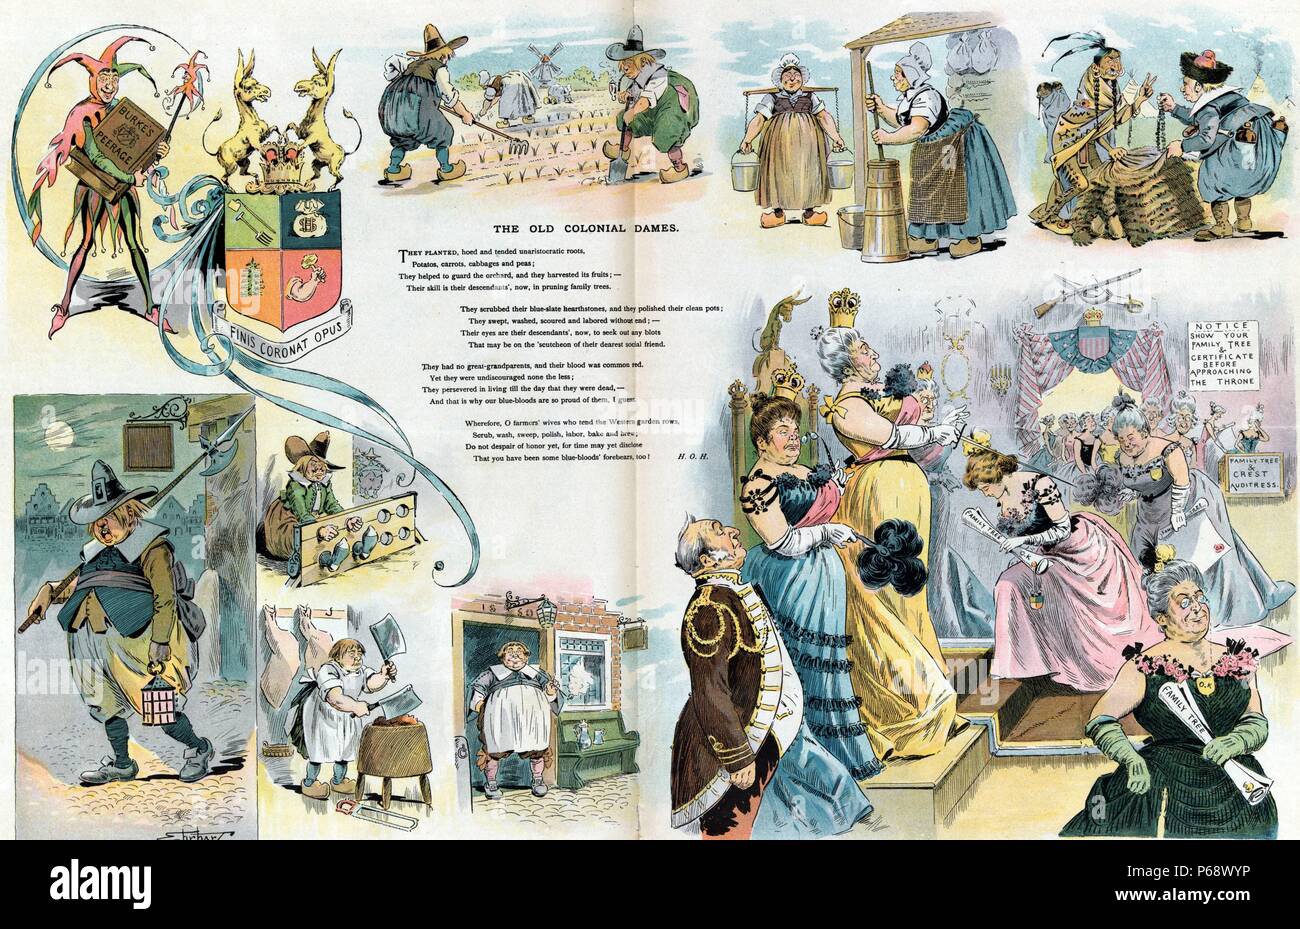 The old colonial dames by Samuel Ehrhart, approximately 1862-1937, artist; Published 1899. cartoon with scenes of American colonial men and women working at domestic and blue collar chores and jobs, leading to a scene with upper class women, each clutching an approved 'Family Tree'. Stock Photo